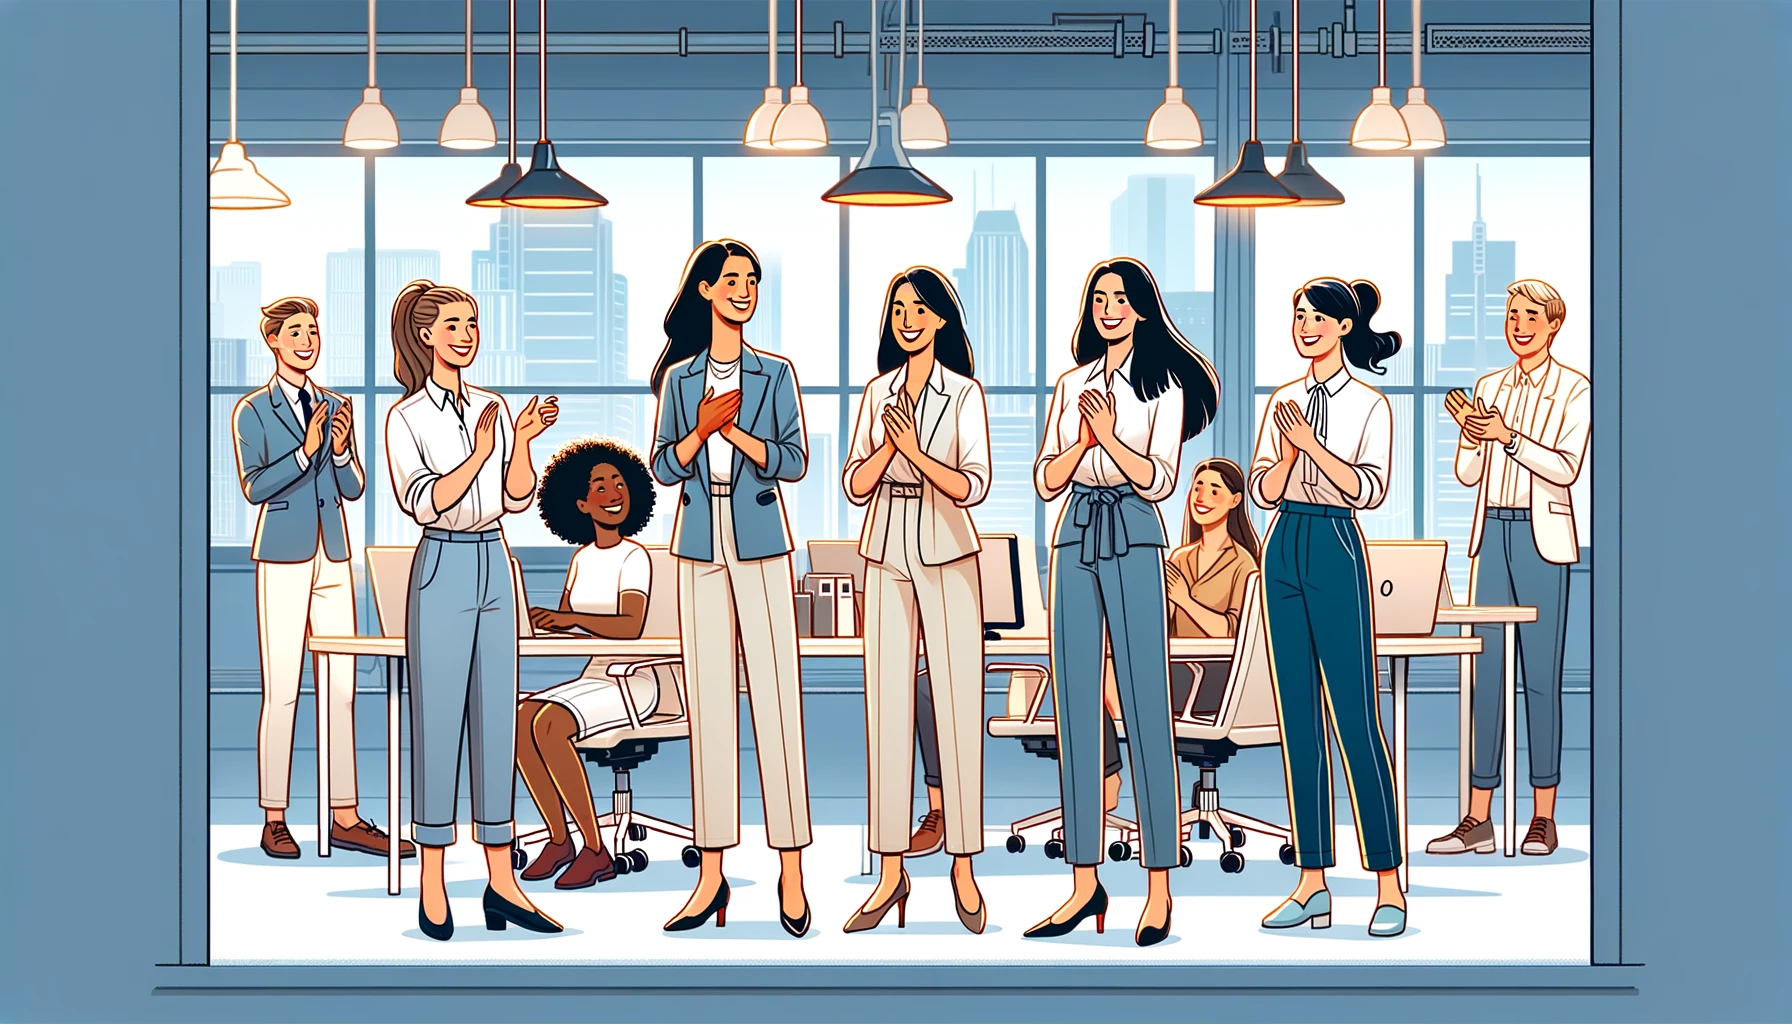 Group of people in business clothes applauding - illustration